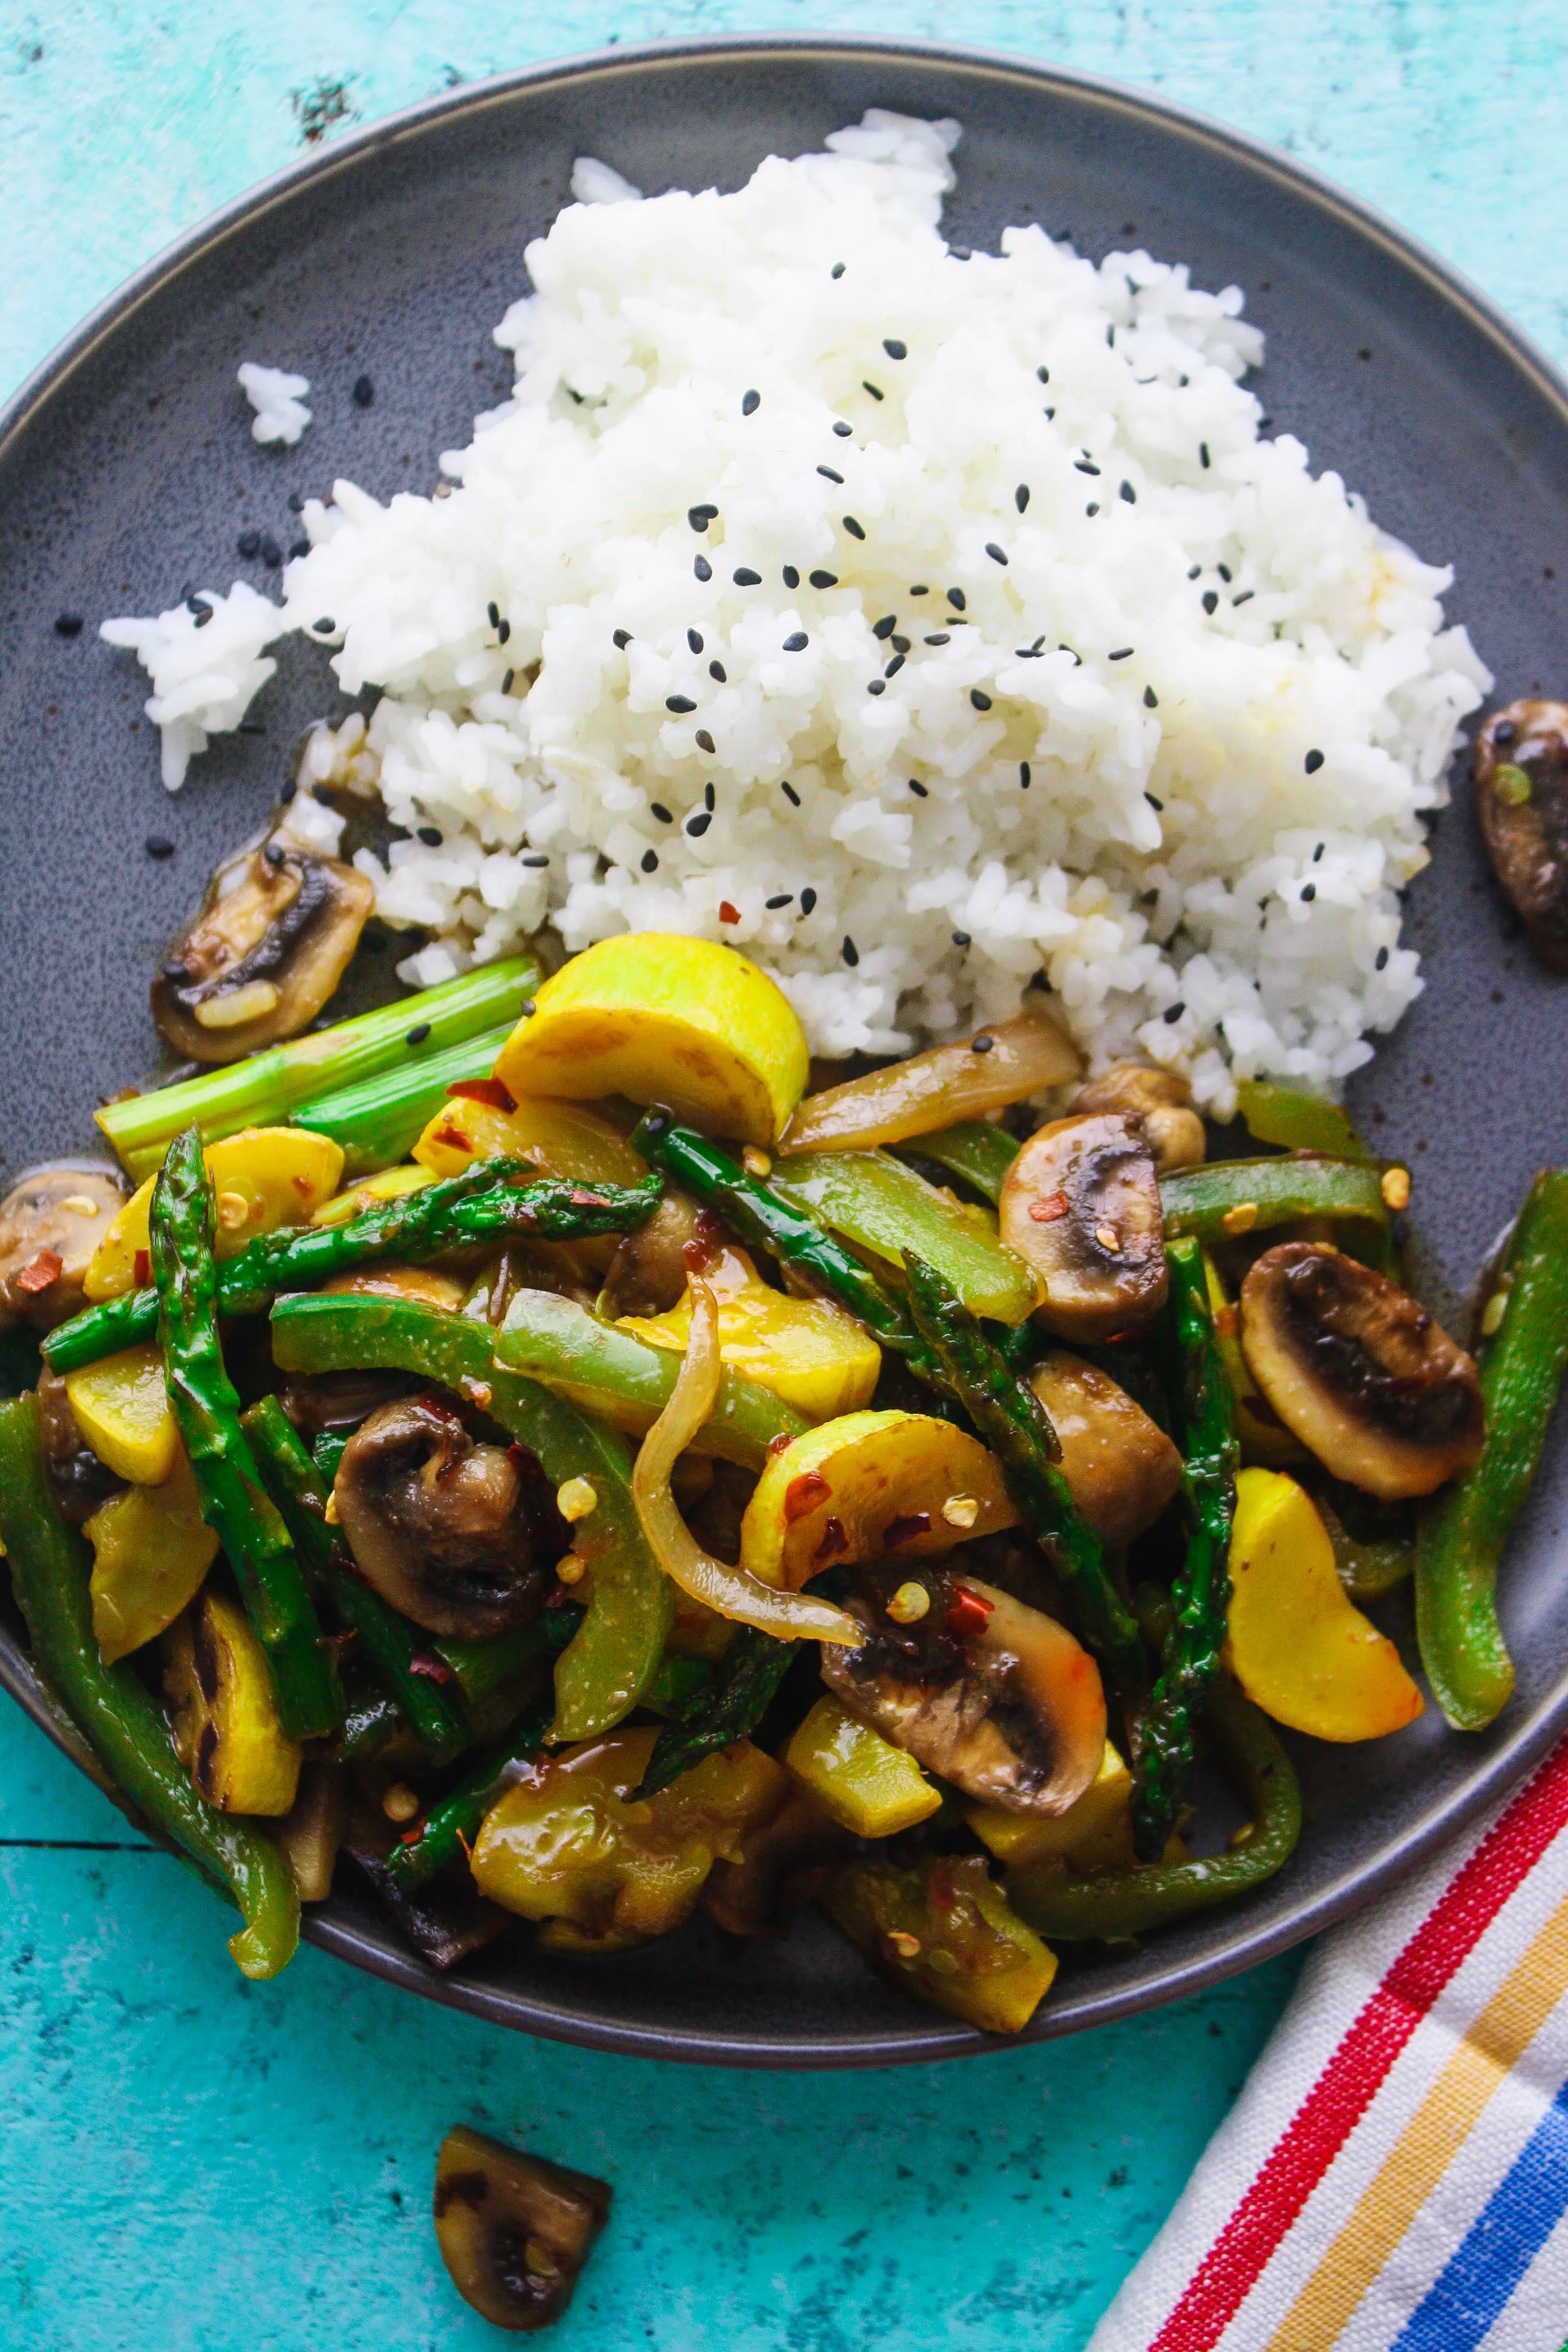 Simple Sweet & Spicy Vegetable Stir Fry is a dish to reach for any night of the week. Simple Sweet & Spicy Vegetable Stir Fry is easy to make, and it tastes amazing!